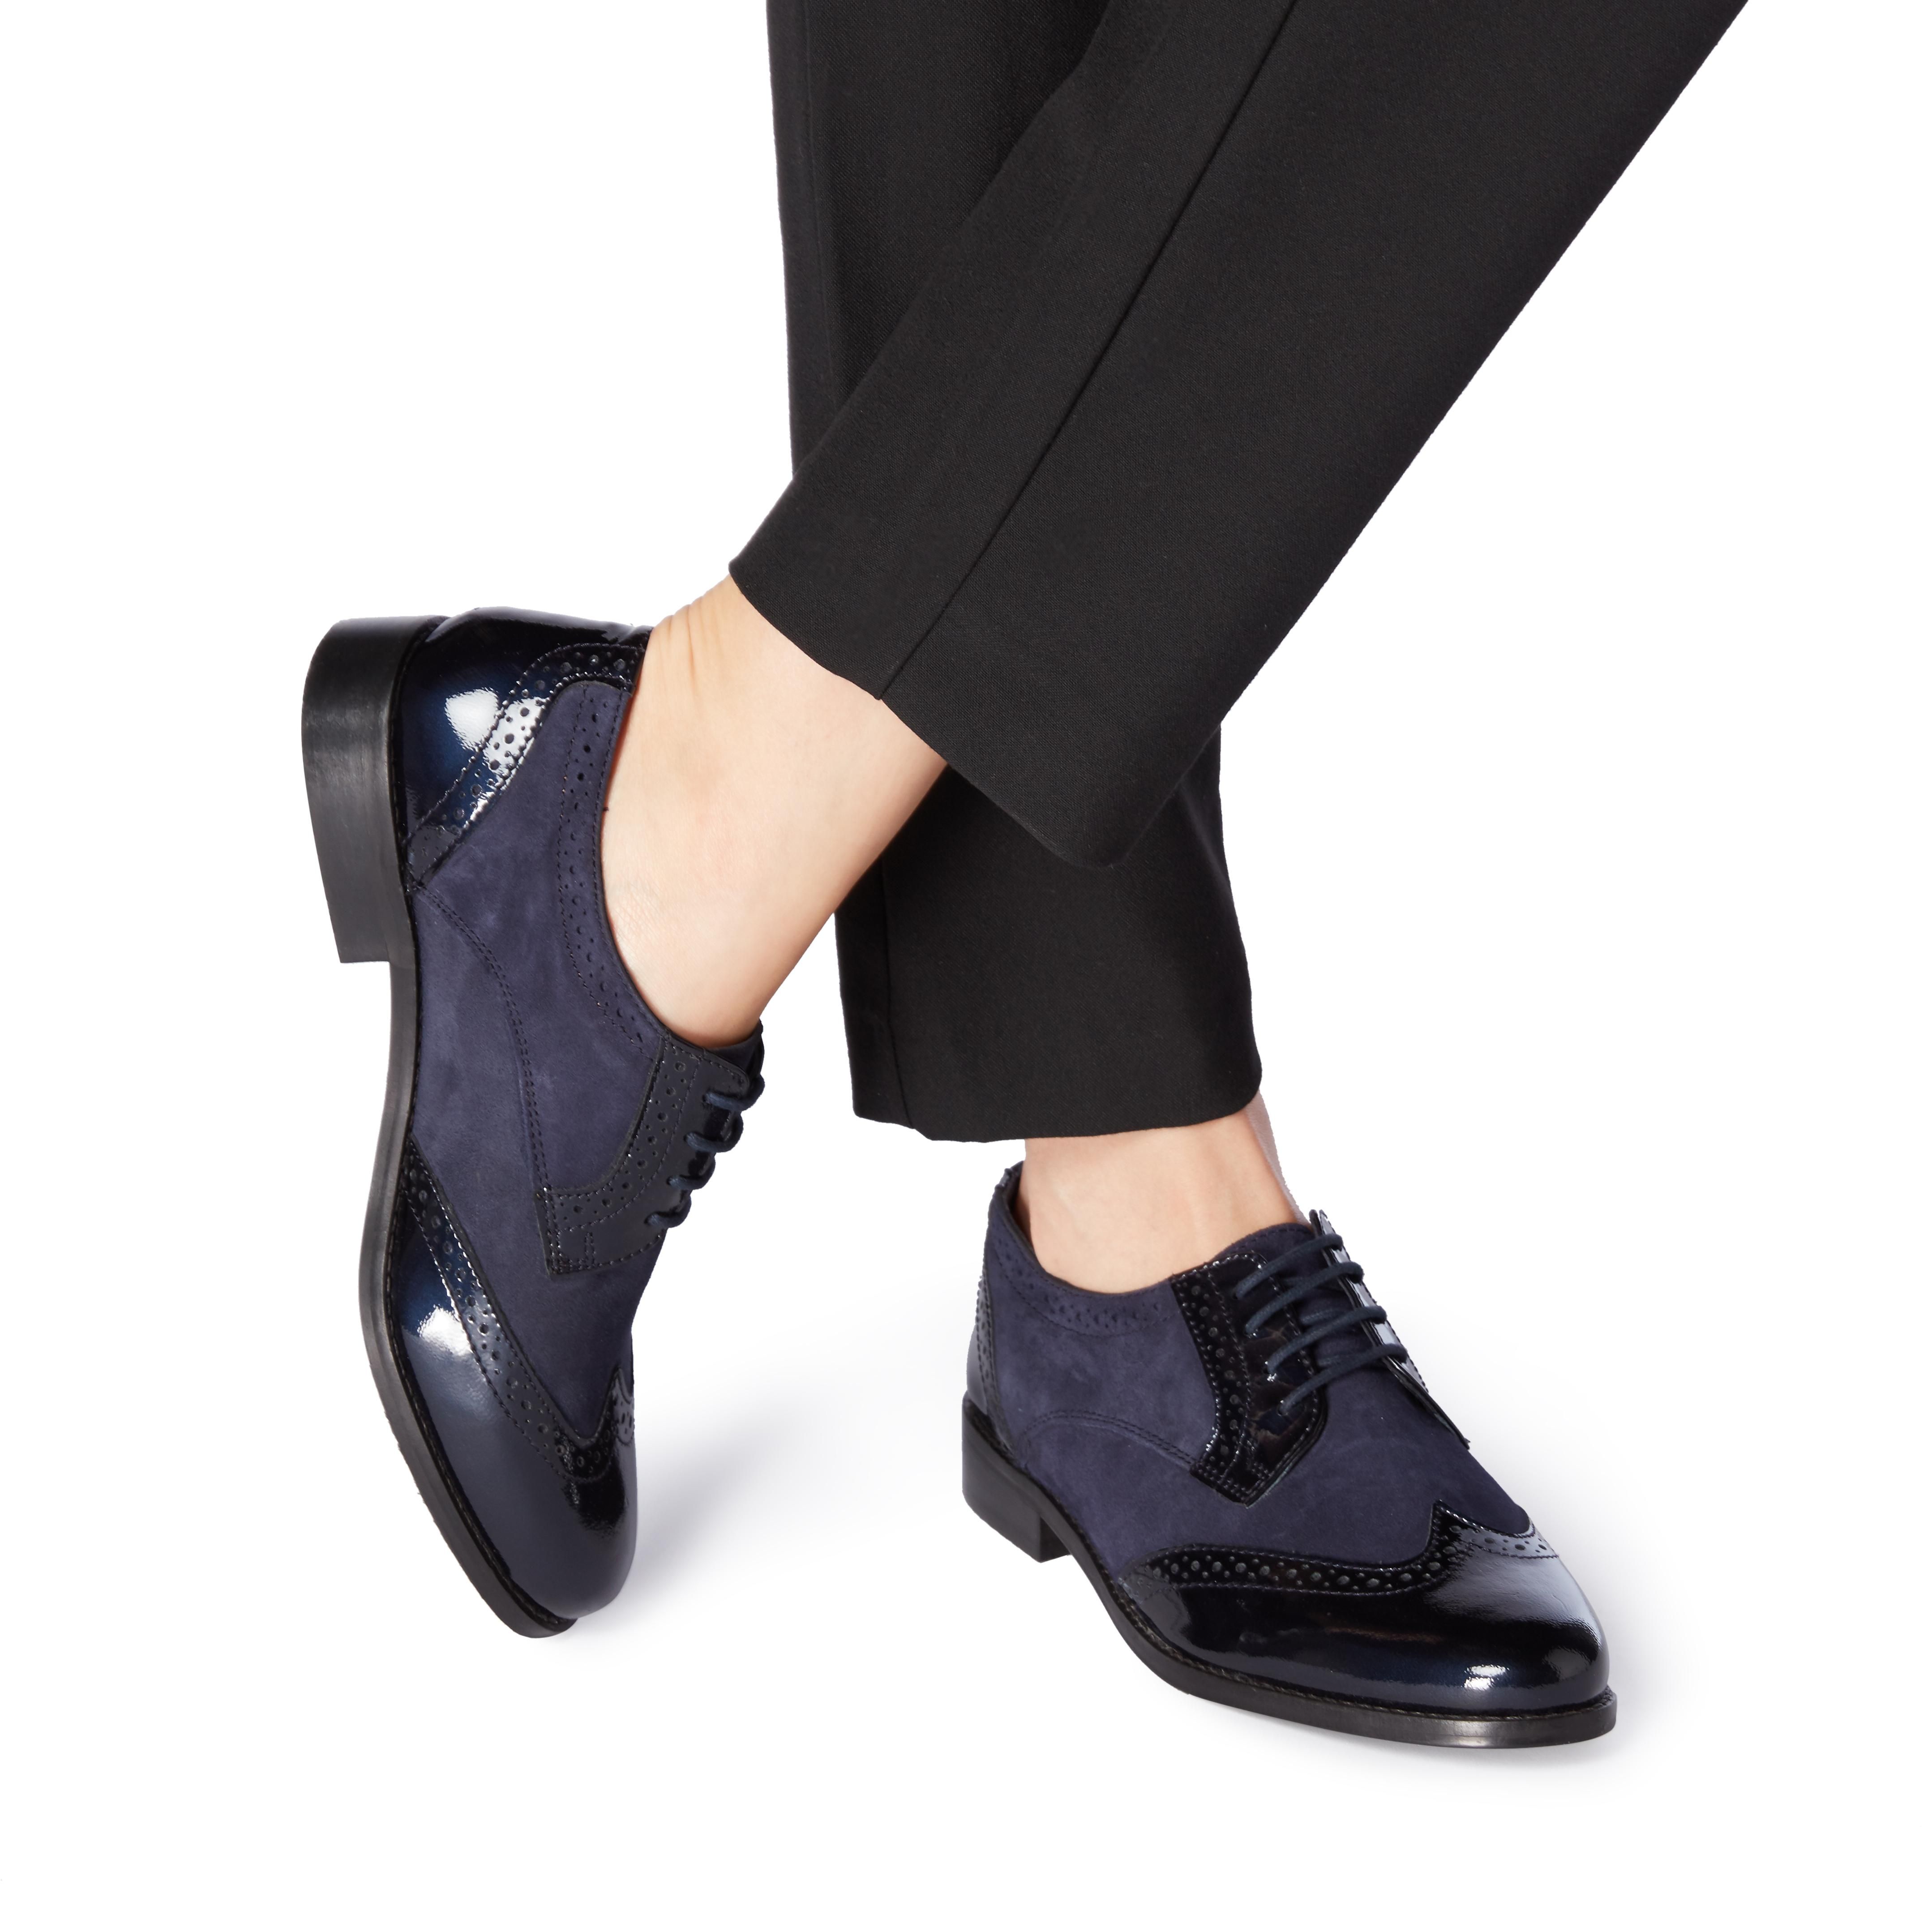 Foxxy is the perfect androgynous brogue shoe with a luxe finish. This lace up style features a round toe and classic wingtip design. The punch hole detailing and multi texture upper complete this look.